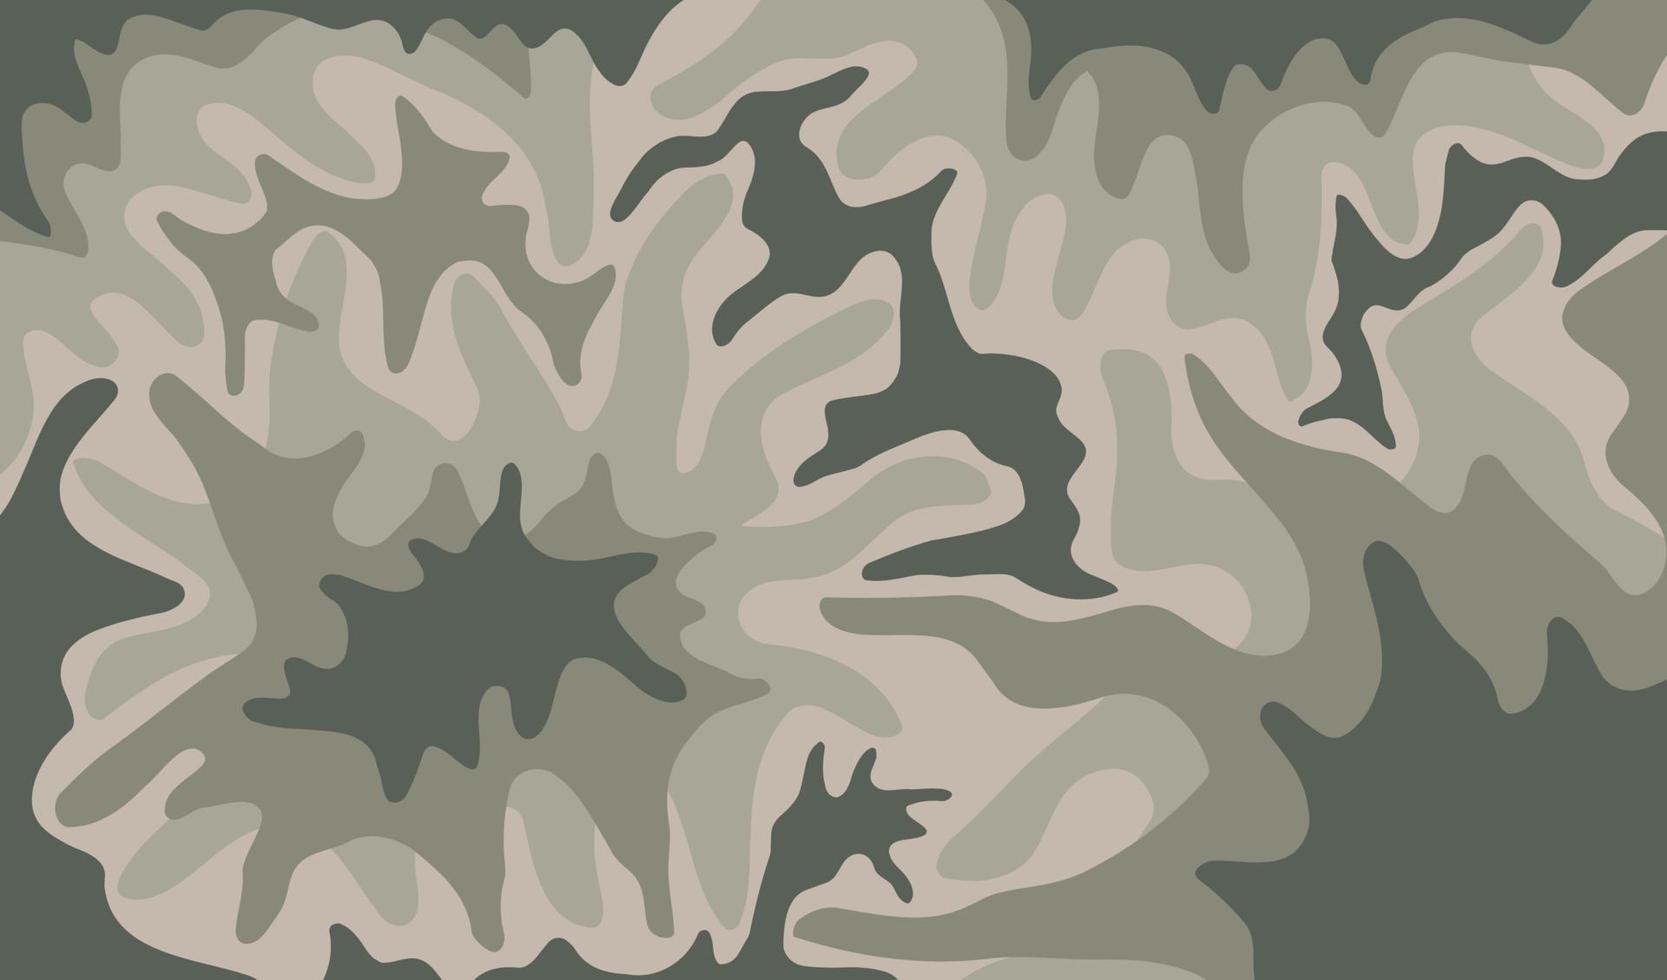 abstract camouflage ons leger patroon soldaat brede achtergrond vector